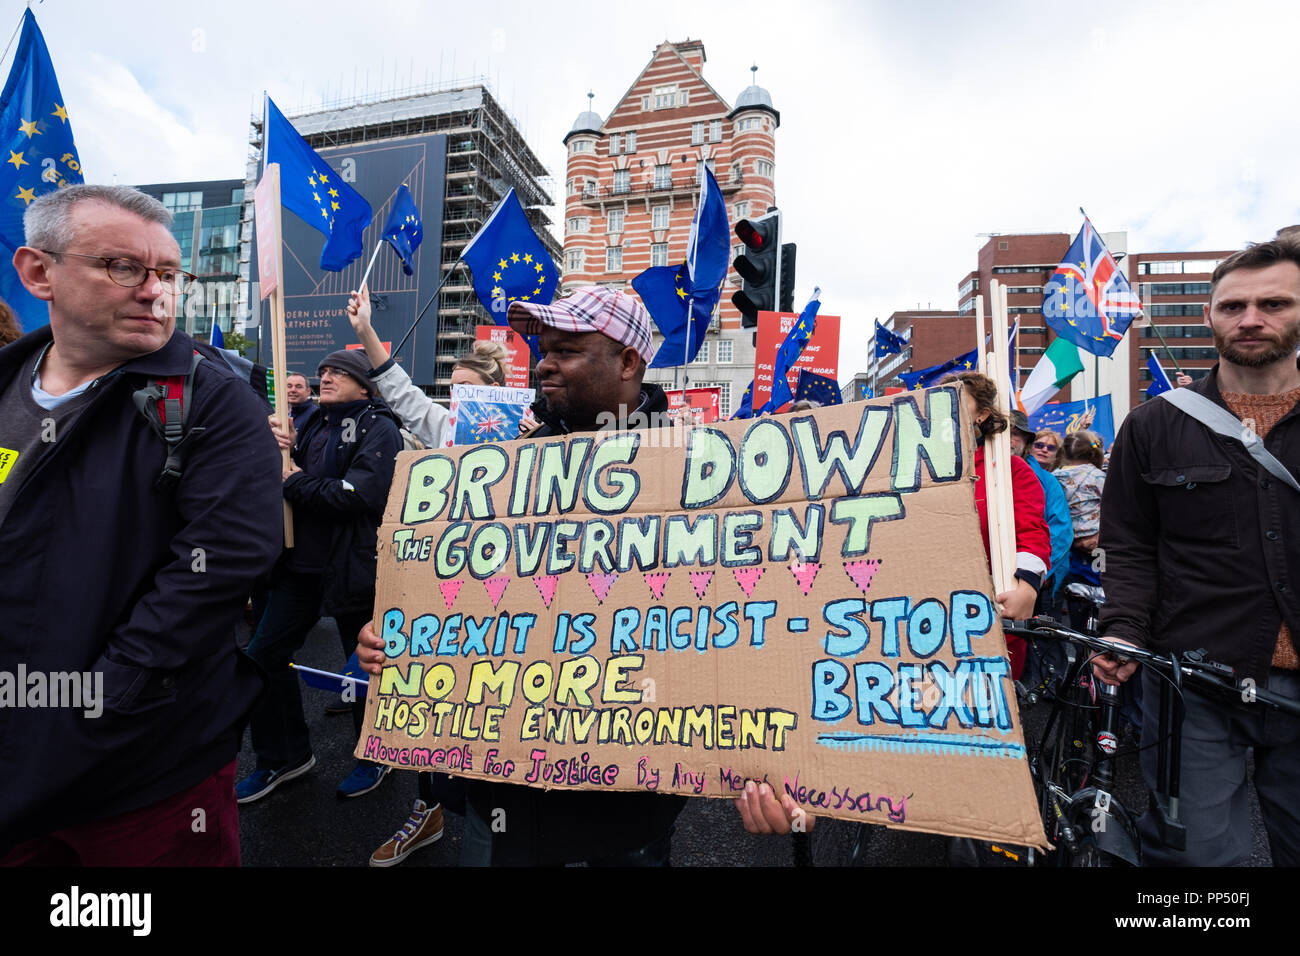 Liverpool, UK. 23rd Sept 2018. Thousands of demonstrators have marched through Liverpool city centre on Sunday, September 23, 2018, calling for a 'People's Vote' on the final Brexit deal. The demonstration coincides with the start of the Labour Party Conference which is being held in the city. © Christopher Middleton/Alamy Live News Stock Photo